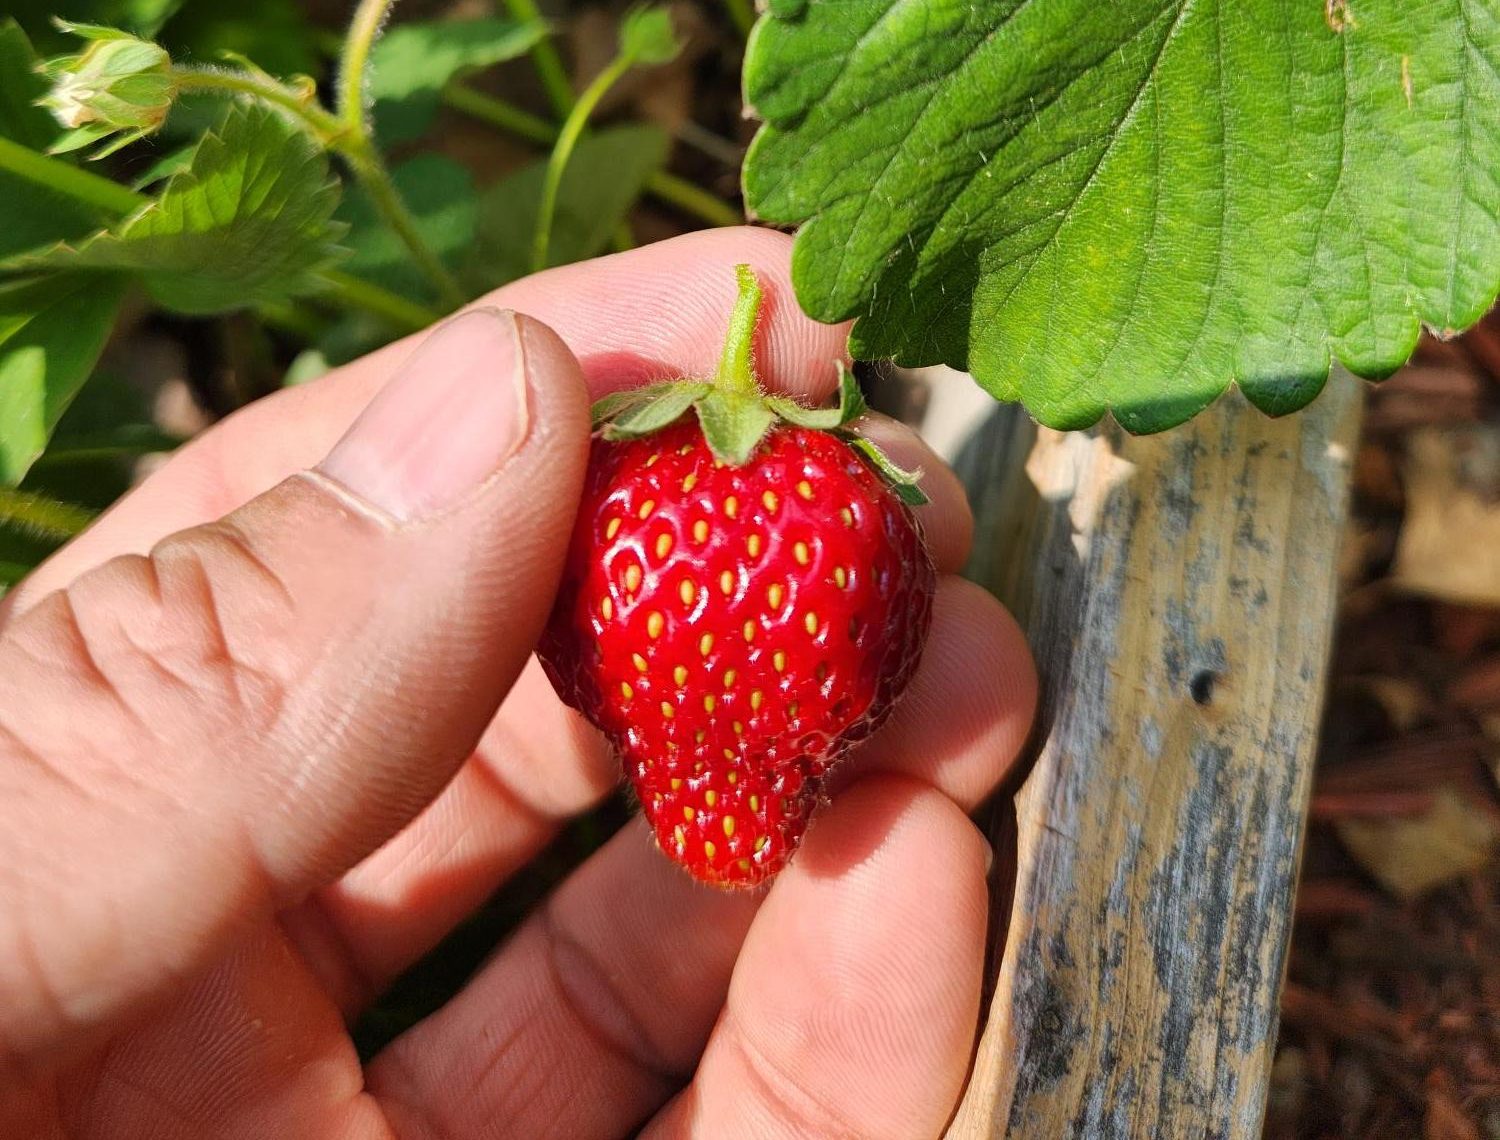 Harvested ripe strawberry (Photo: Randall Vos - Iowa State University Extension & Outreach)